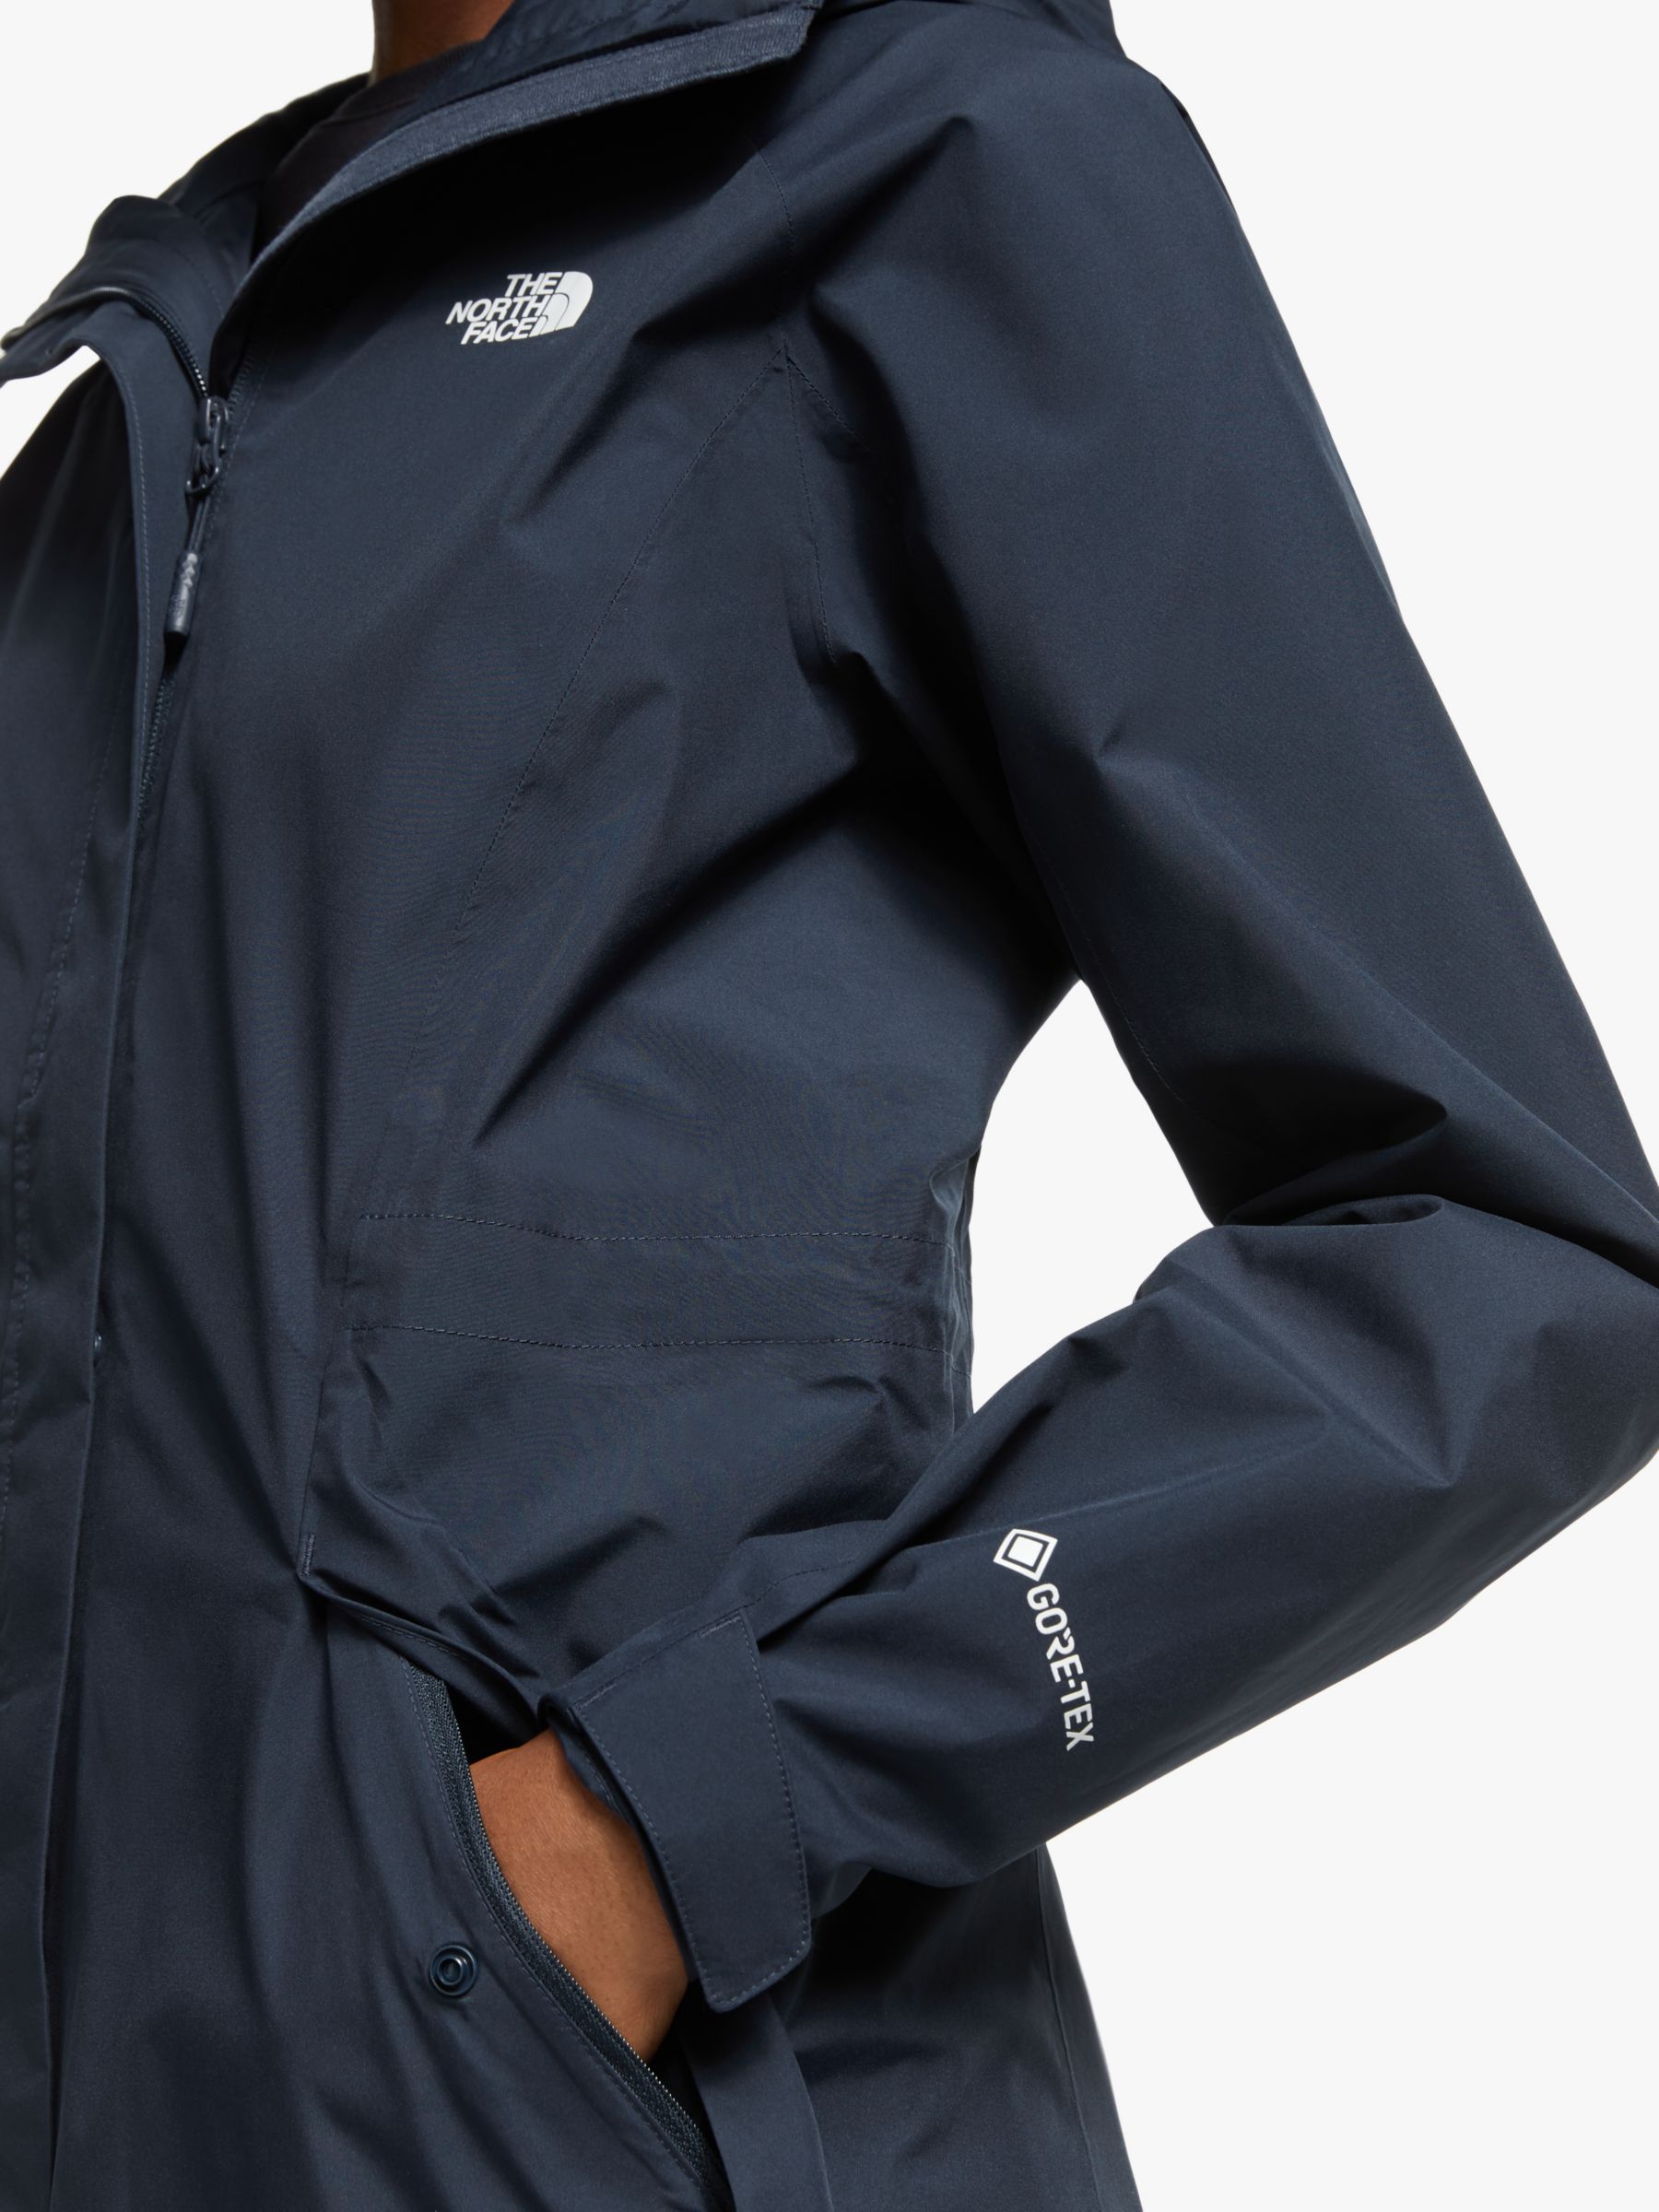 north face gore tex womens jacket